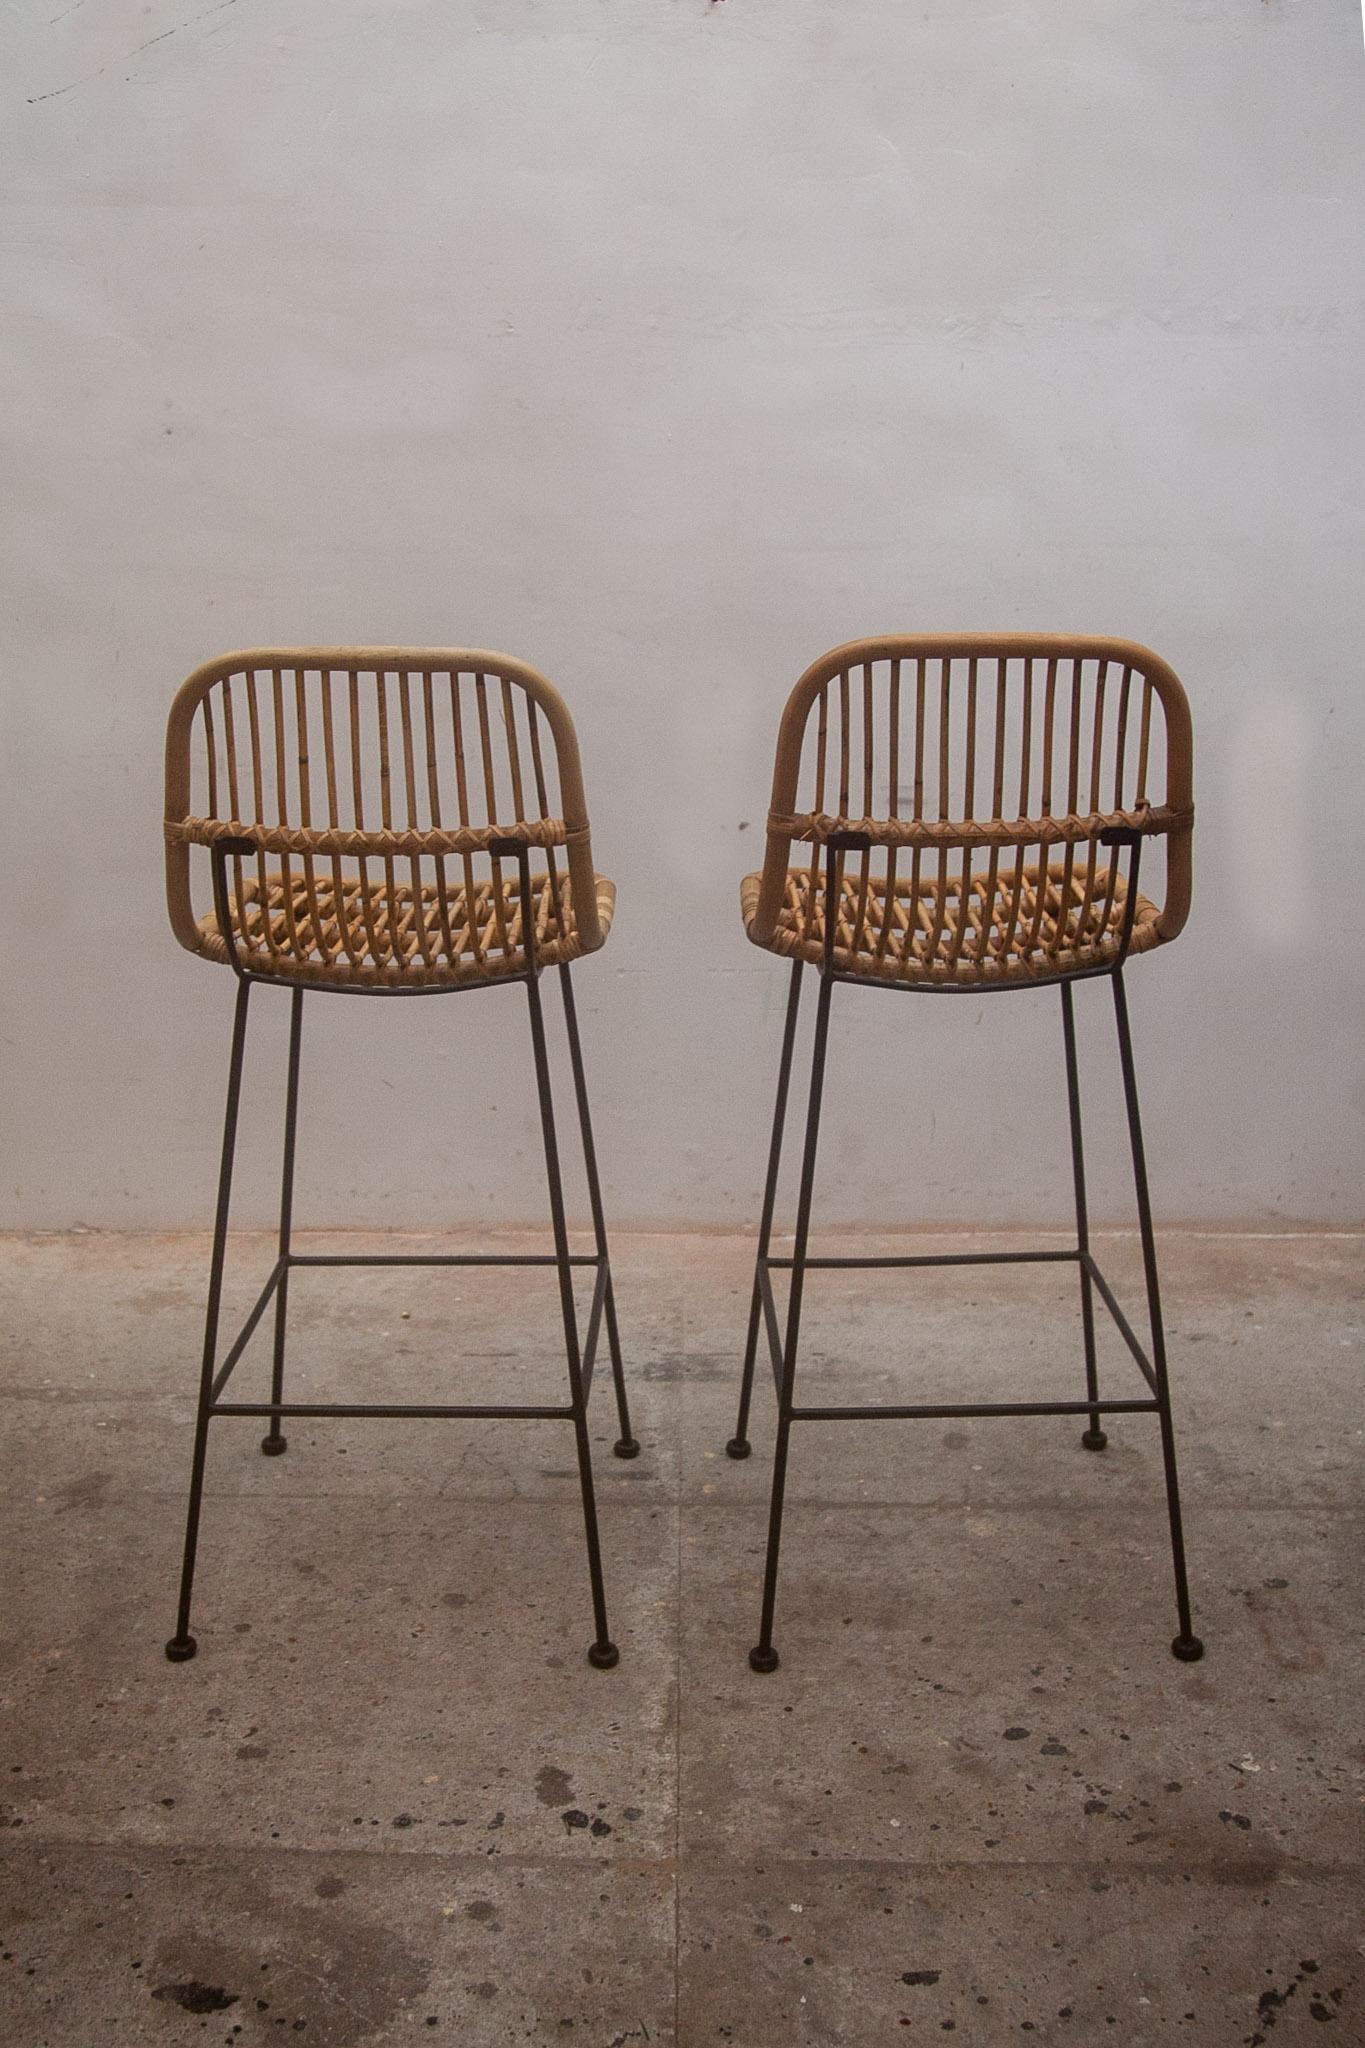 Mid-20th Century Bamboo, Rattan Bar Stools with Metal Legs, Italy Set of Two